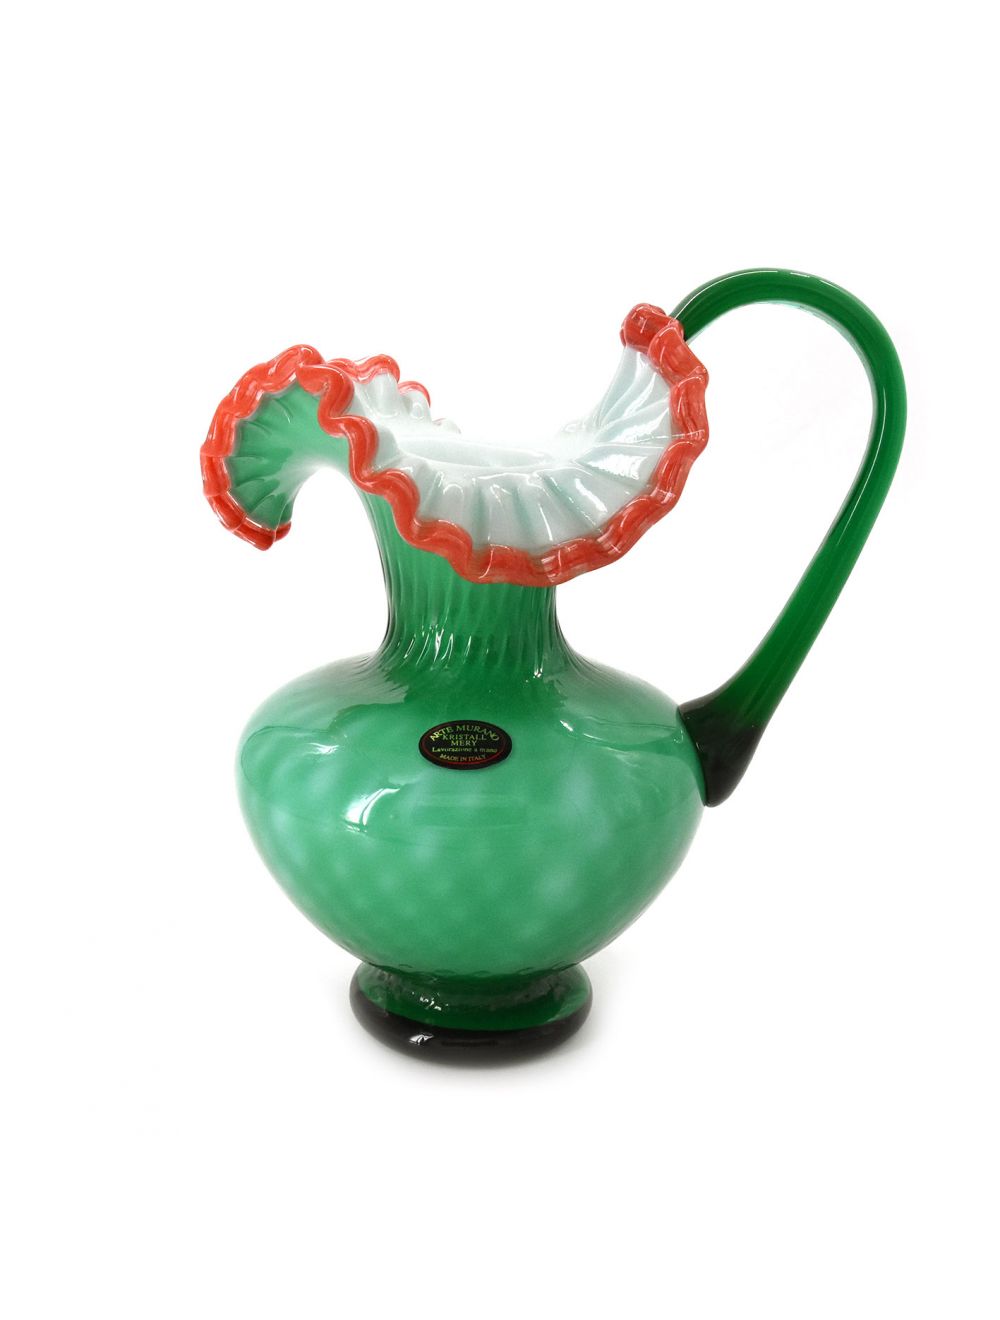 Green Flower Vase With Handle and Red Bordered Design